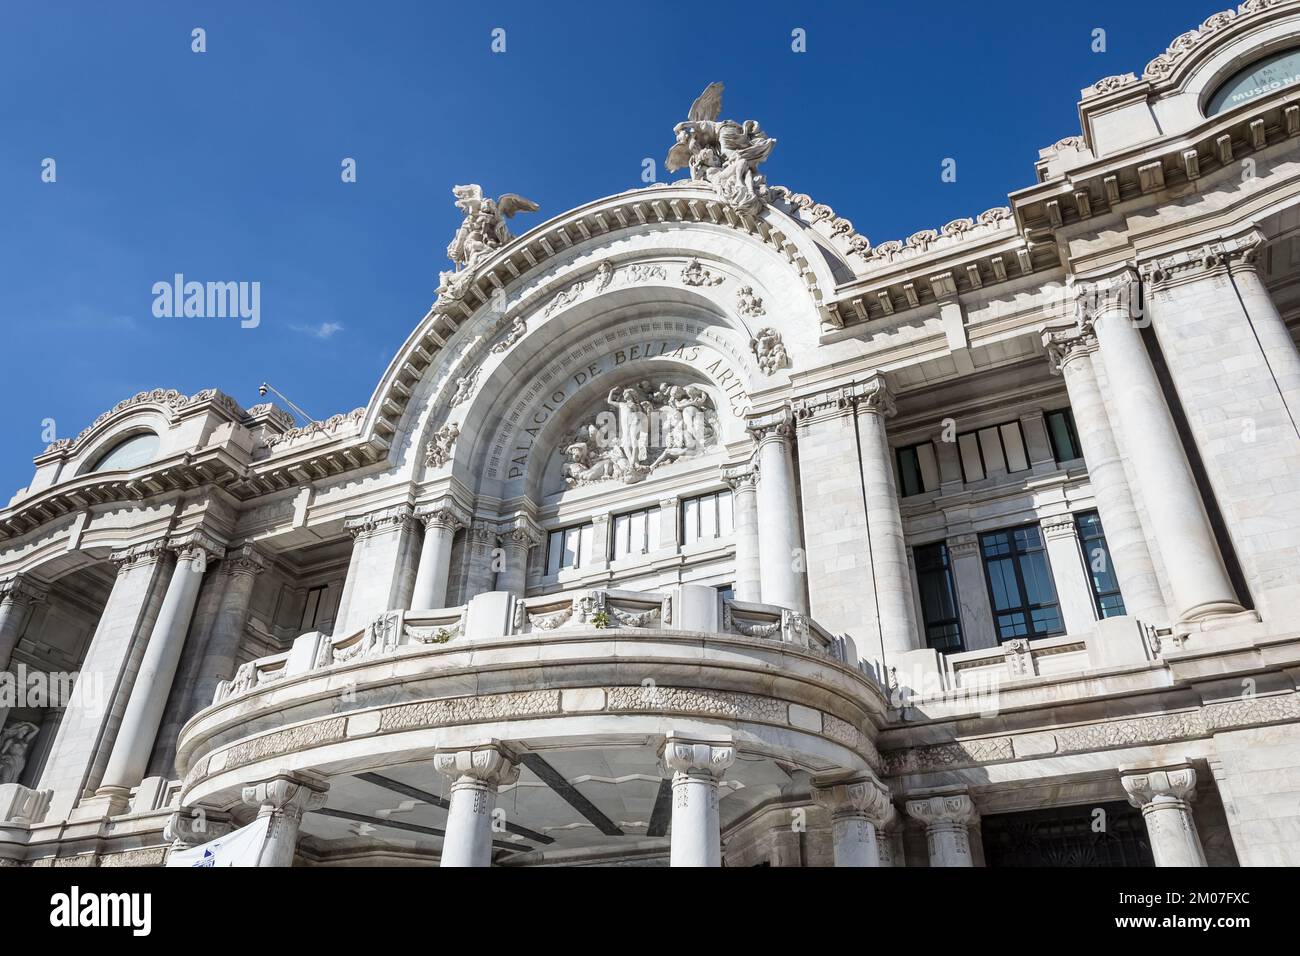 Architectural detail of the Palacio de Bellas Artes (Palace of Fine Arts), a prominent cultural center in Mexico City located in the city center Stock Photo